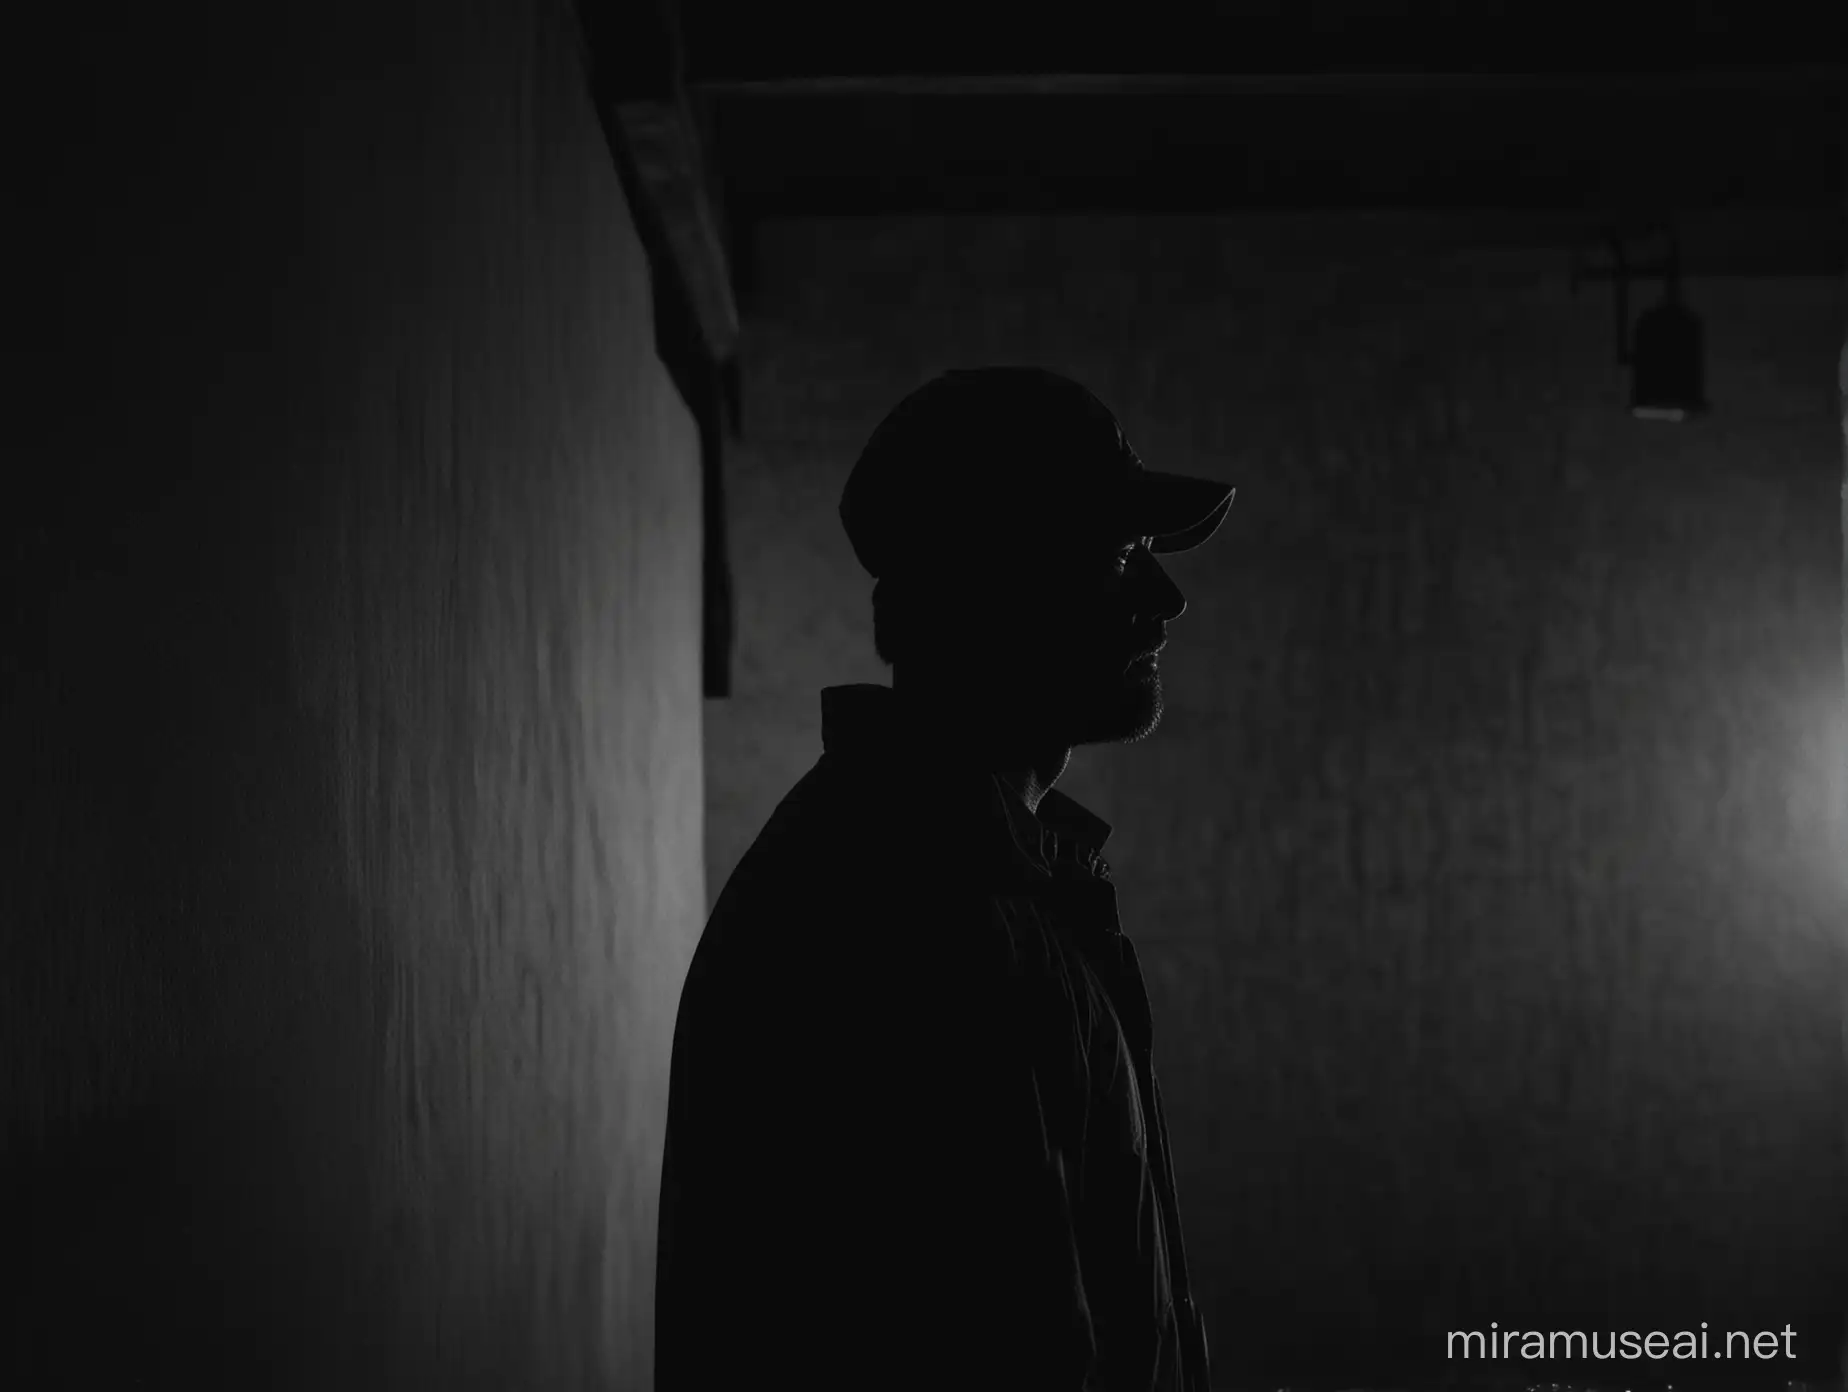 Mysterious Silhouette of a Man with a Cap in the Dark House at Night